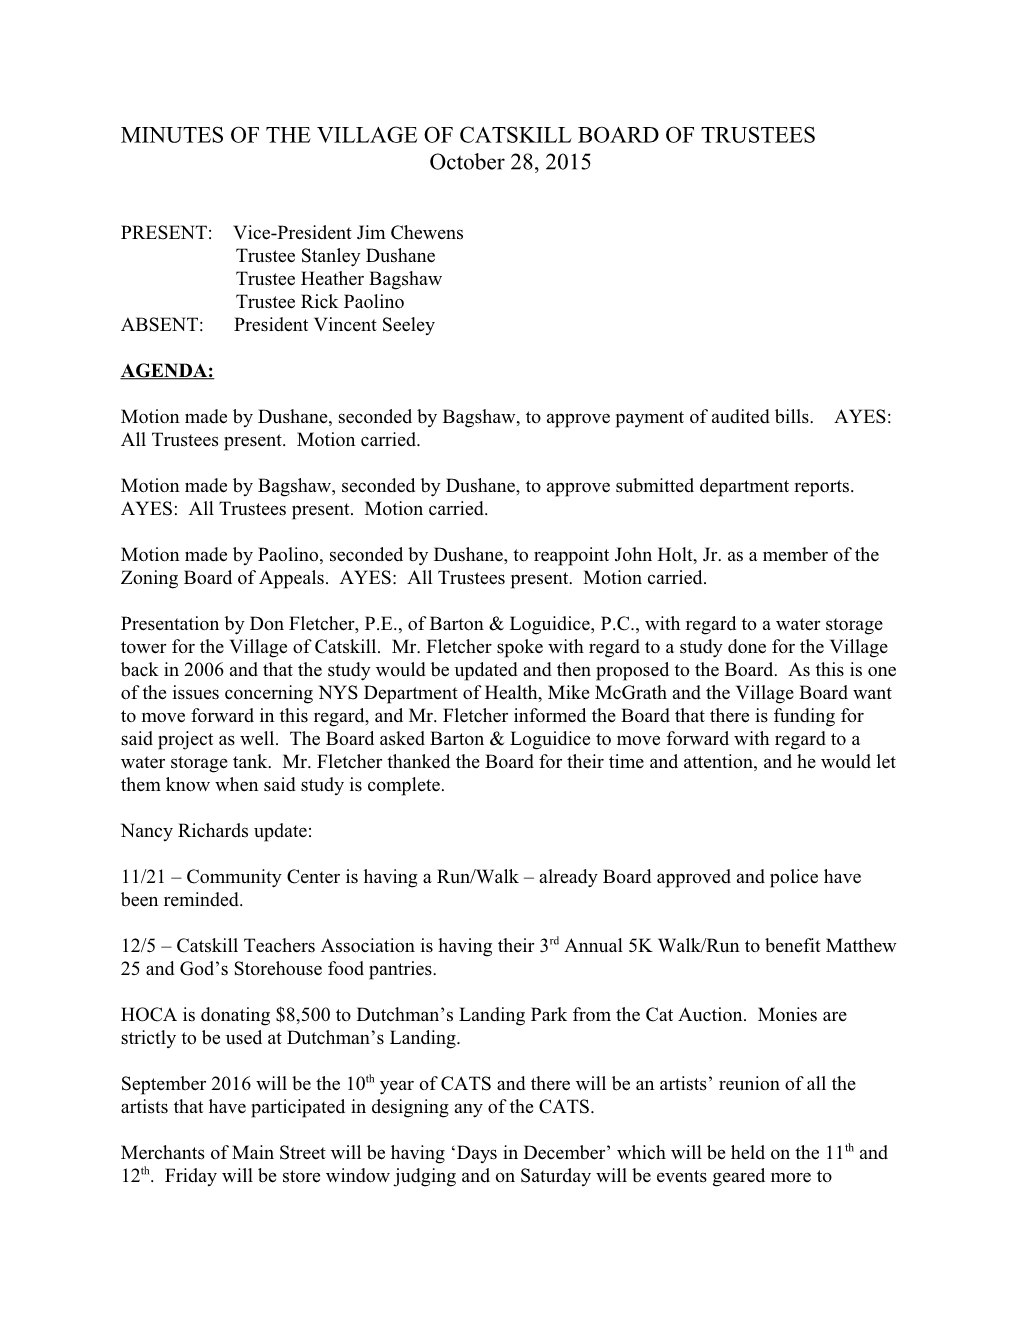 Minutes of the Village of Catskill Board of Trustees s3